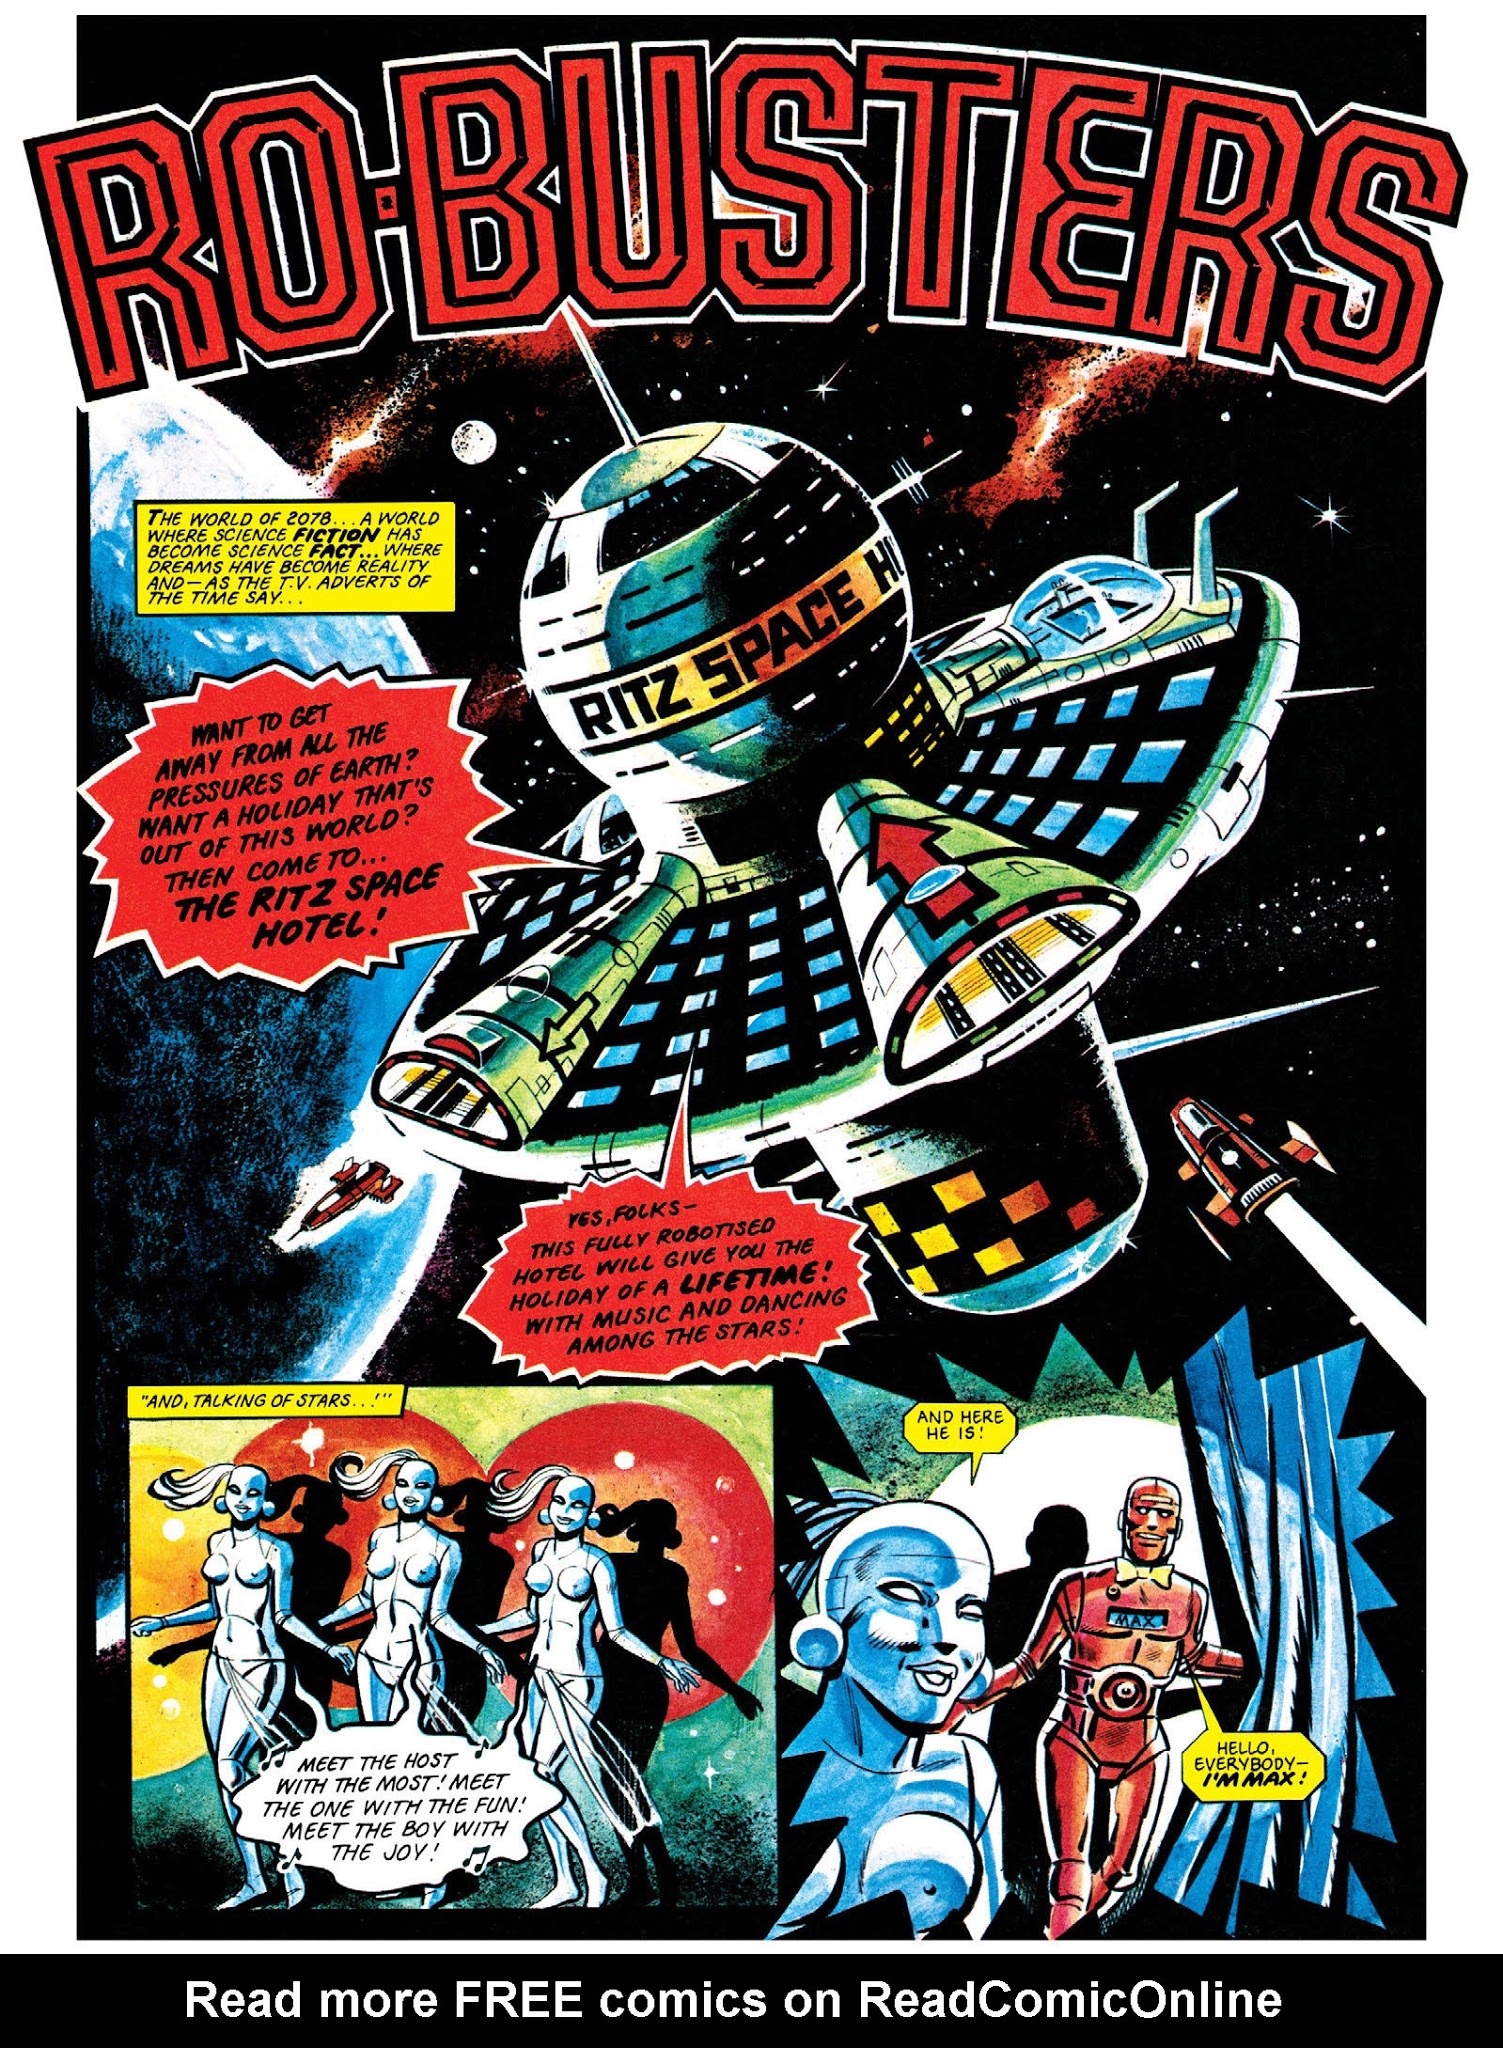 Read online Ro-Busters comic -  Issue # TPB 1 - 42